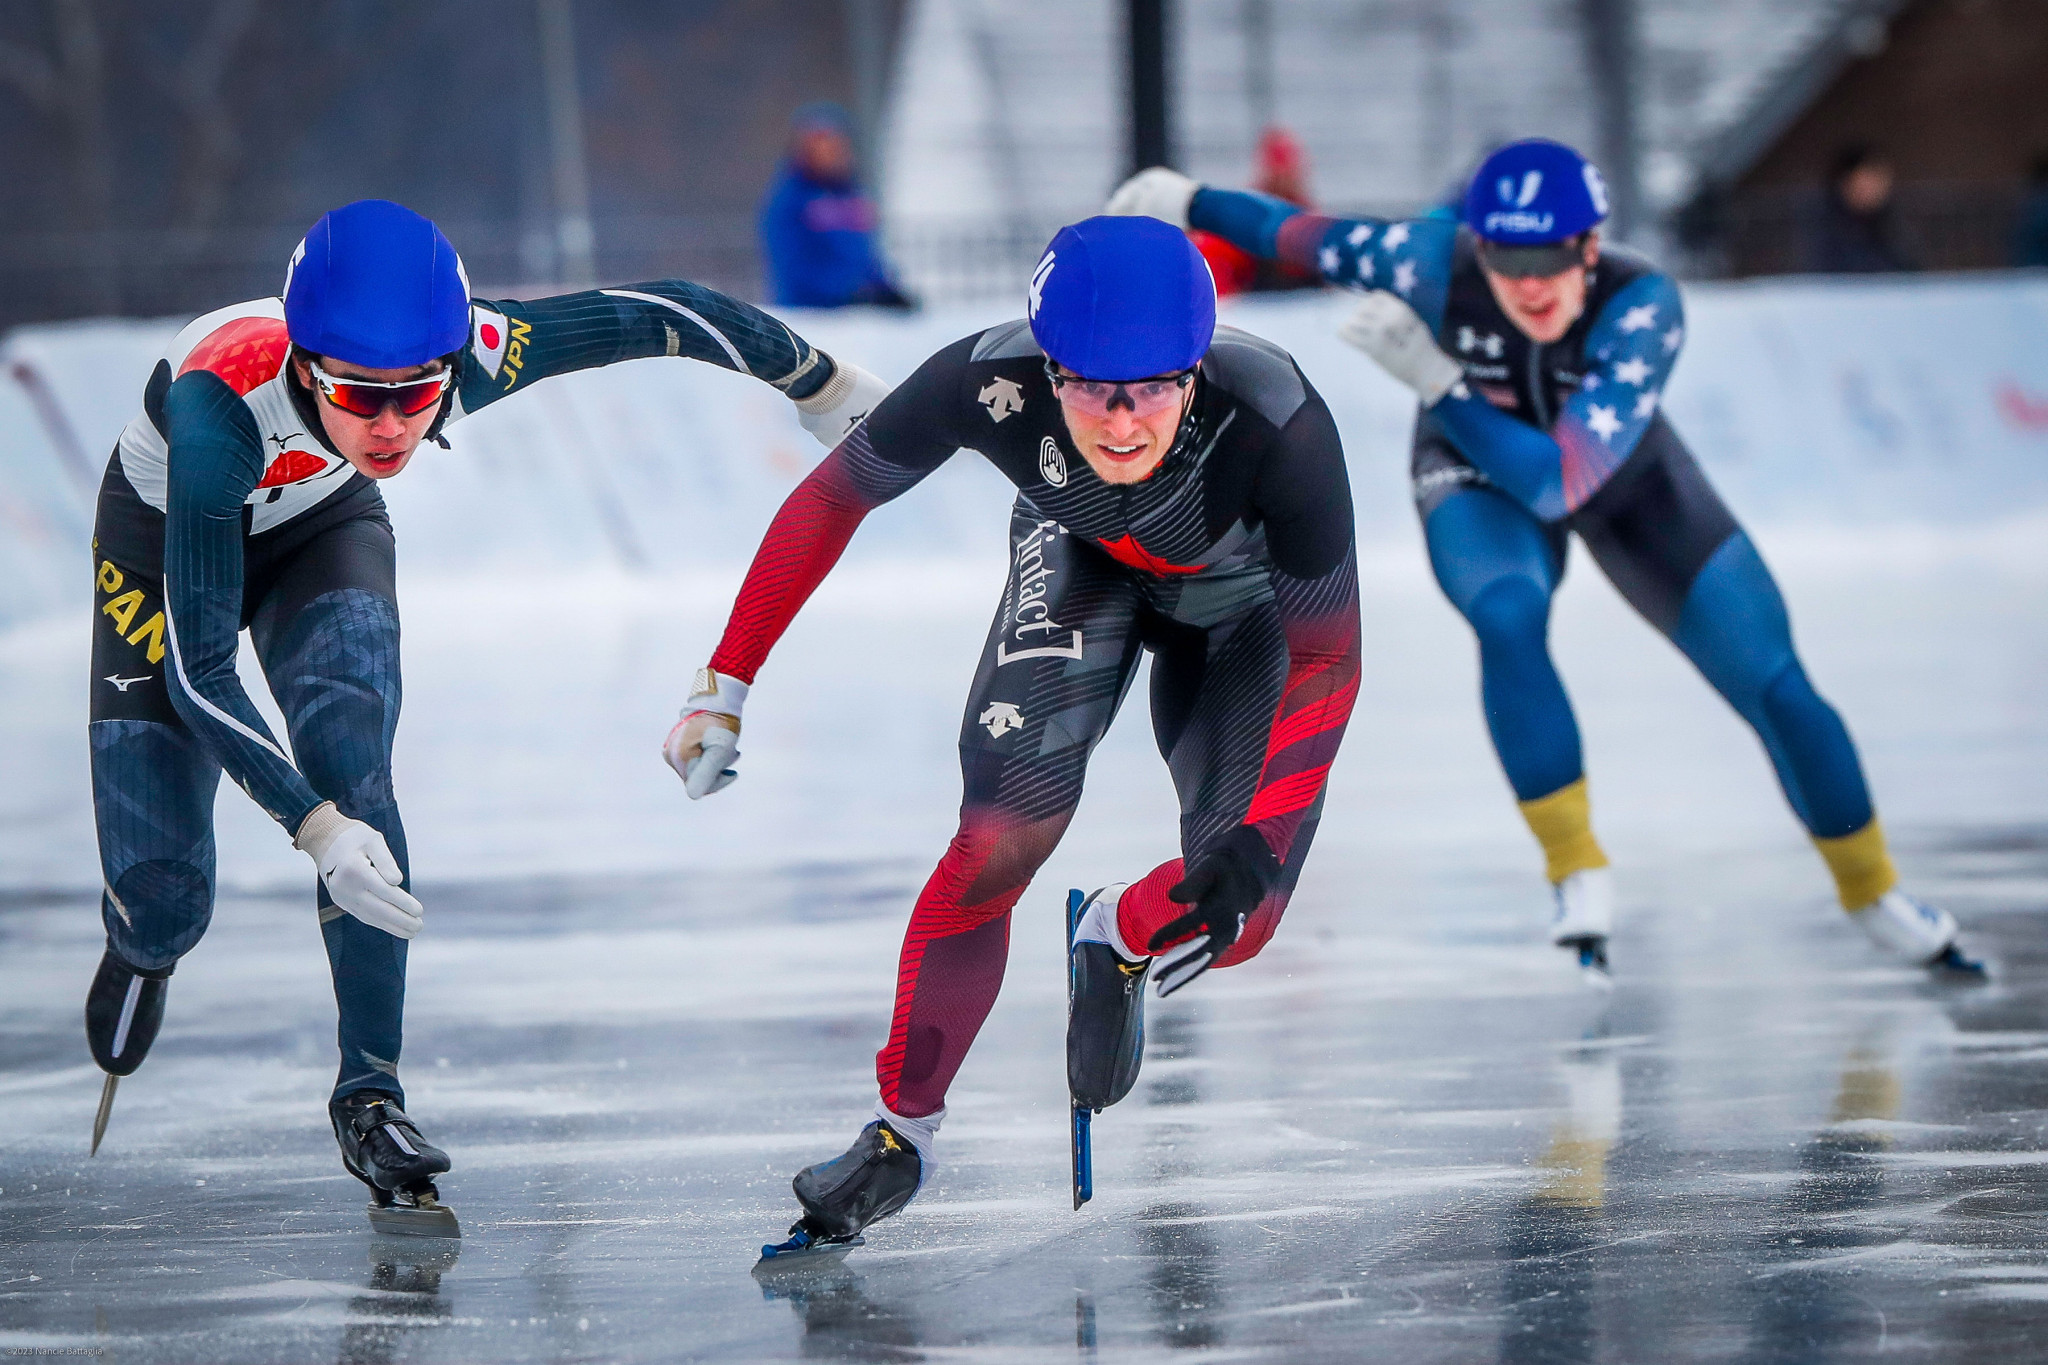 South Korea won by a distance with a time of 3:10.84 to beat Japan and Spain in the first day of short track at Lake Placid 2023 ©FISU